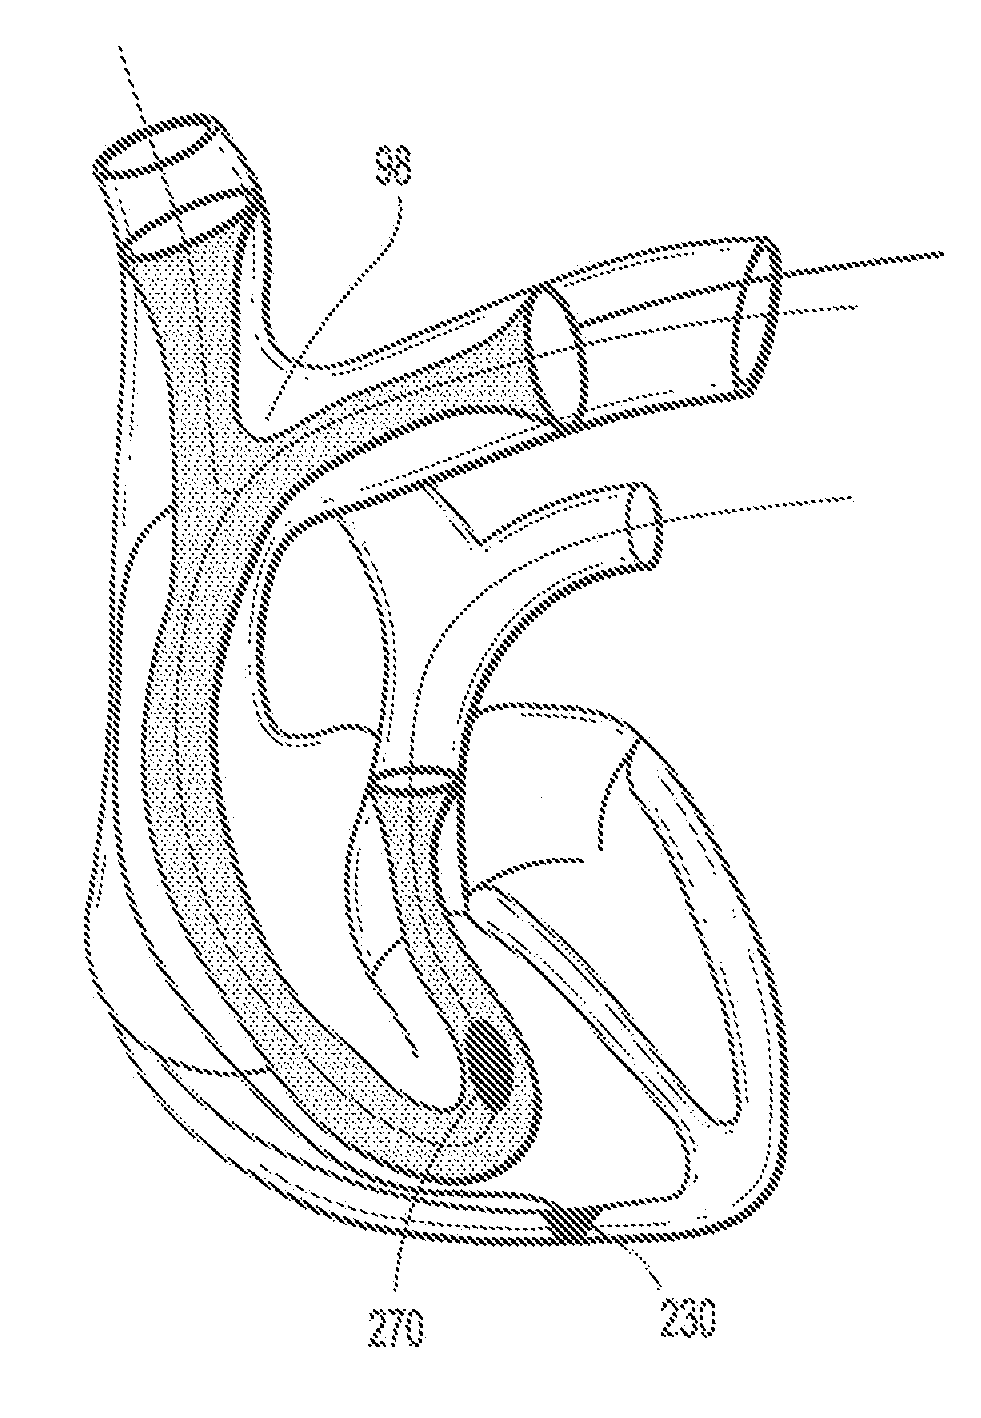 Endovascular conduit device with low profile occlusion members